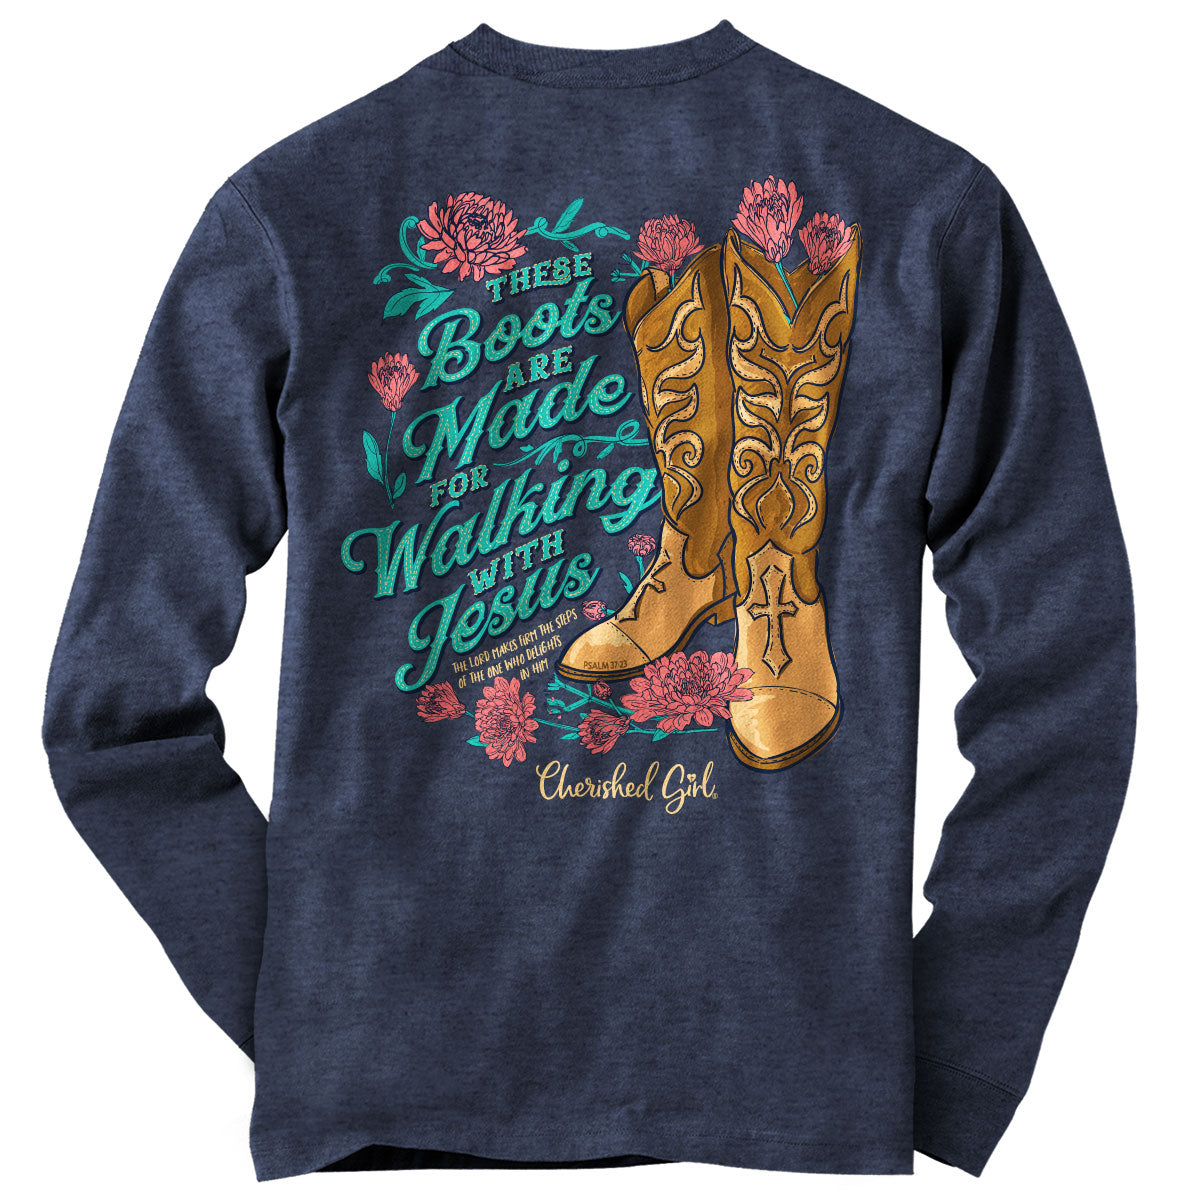 Cherished Girl Walking Boots With Jesus Long Sleeve T-Shirt